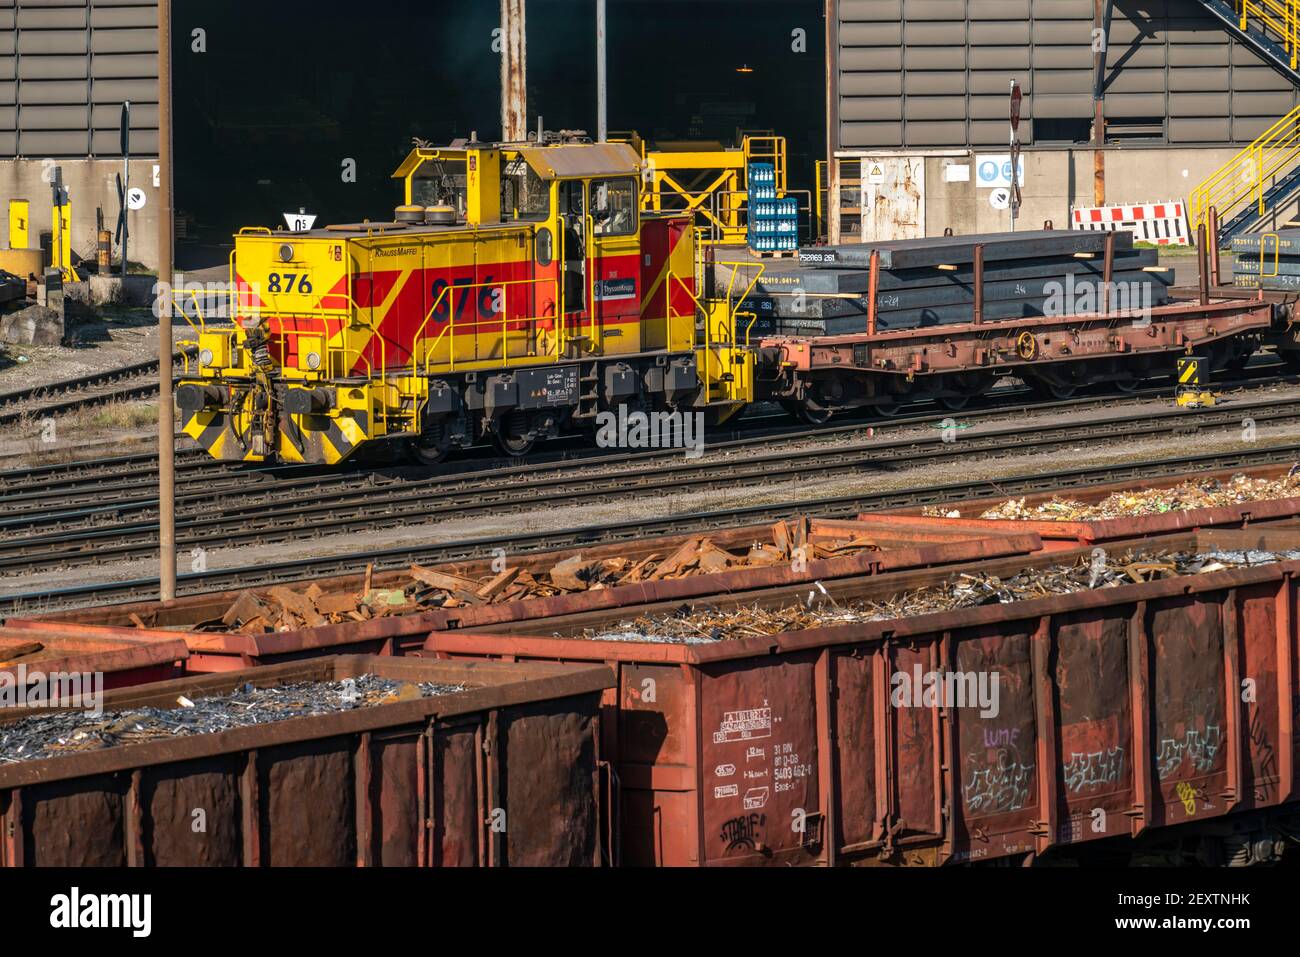 Metal scrap delivery, by rail, to HKM, Hüttenwerke Krupp-Mannesmann in Duisburg-Hüttenheim, they are remelted and processed into steel products, diese Stock Photo